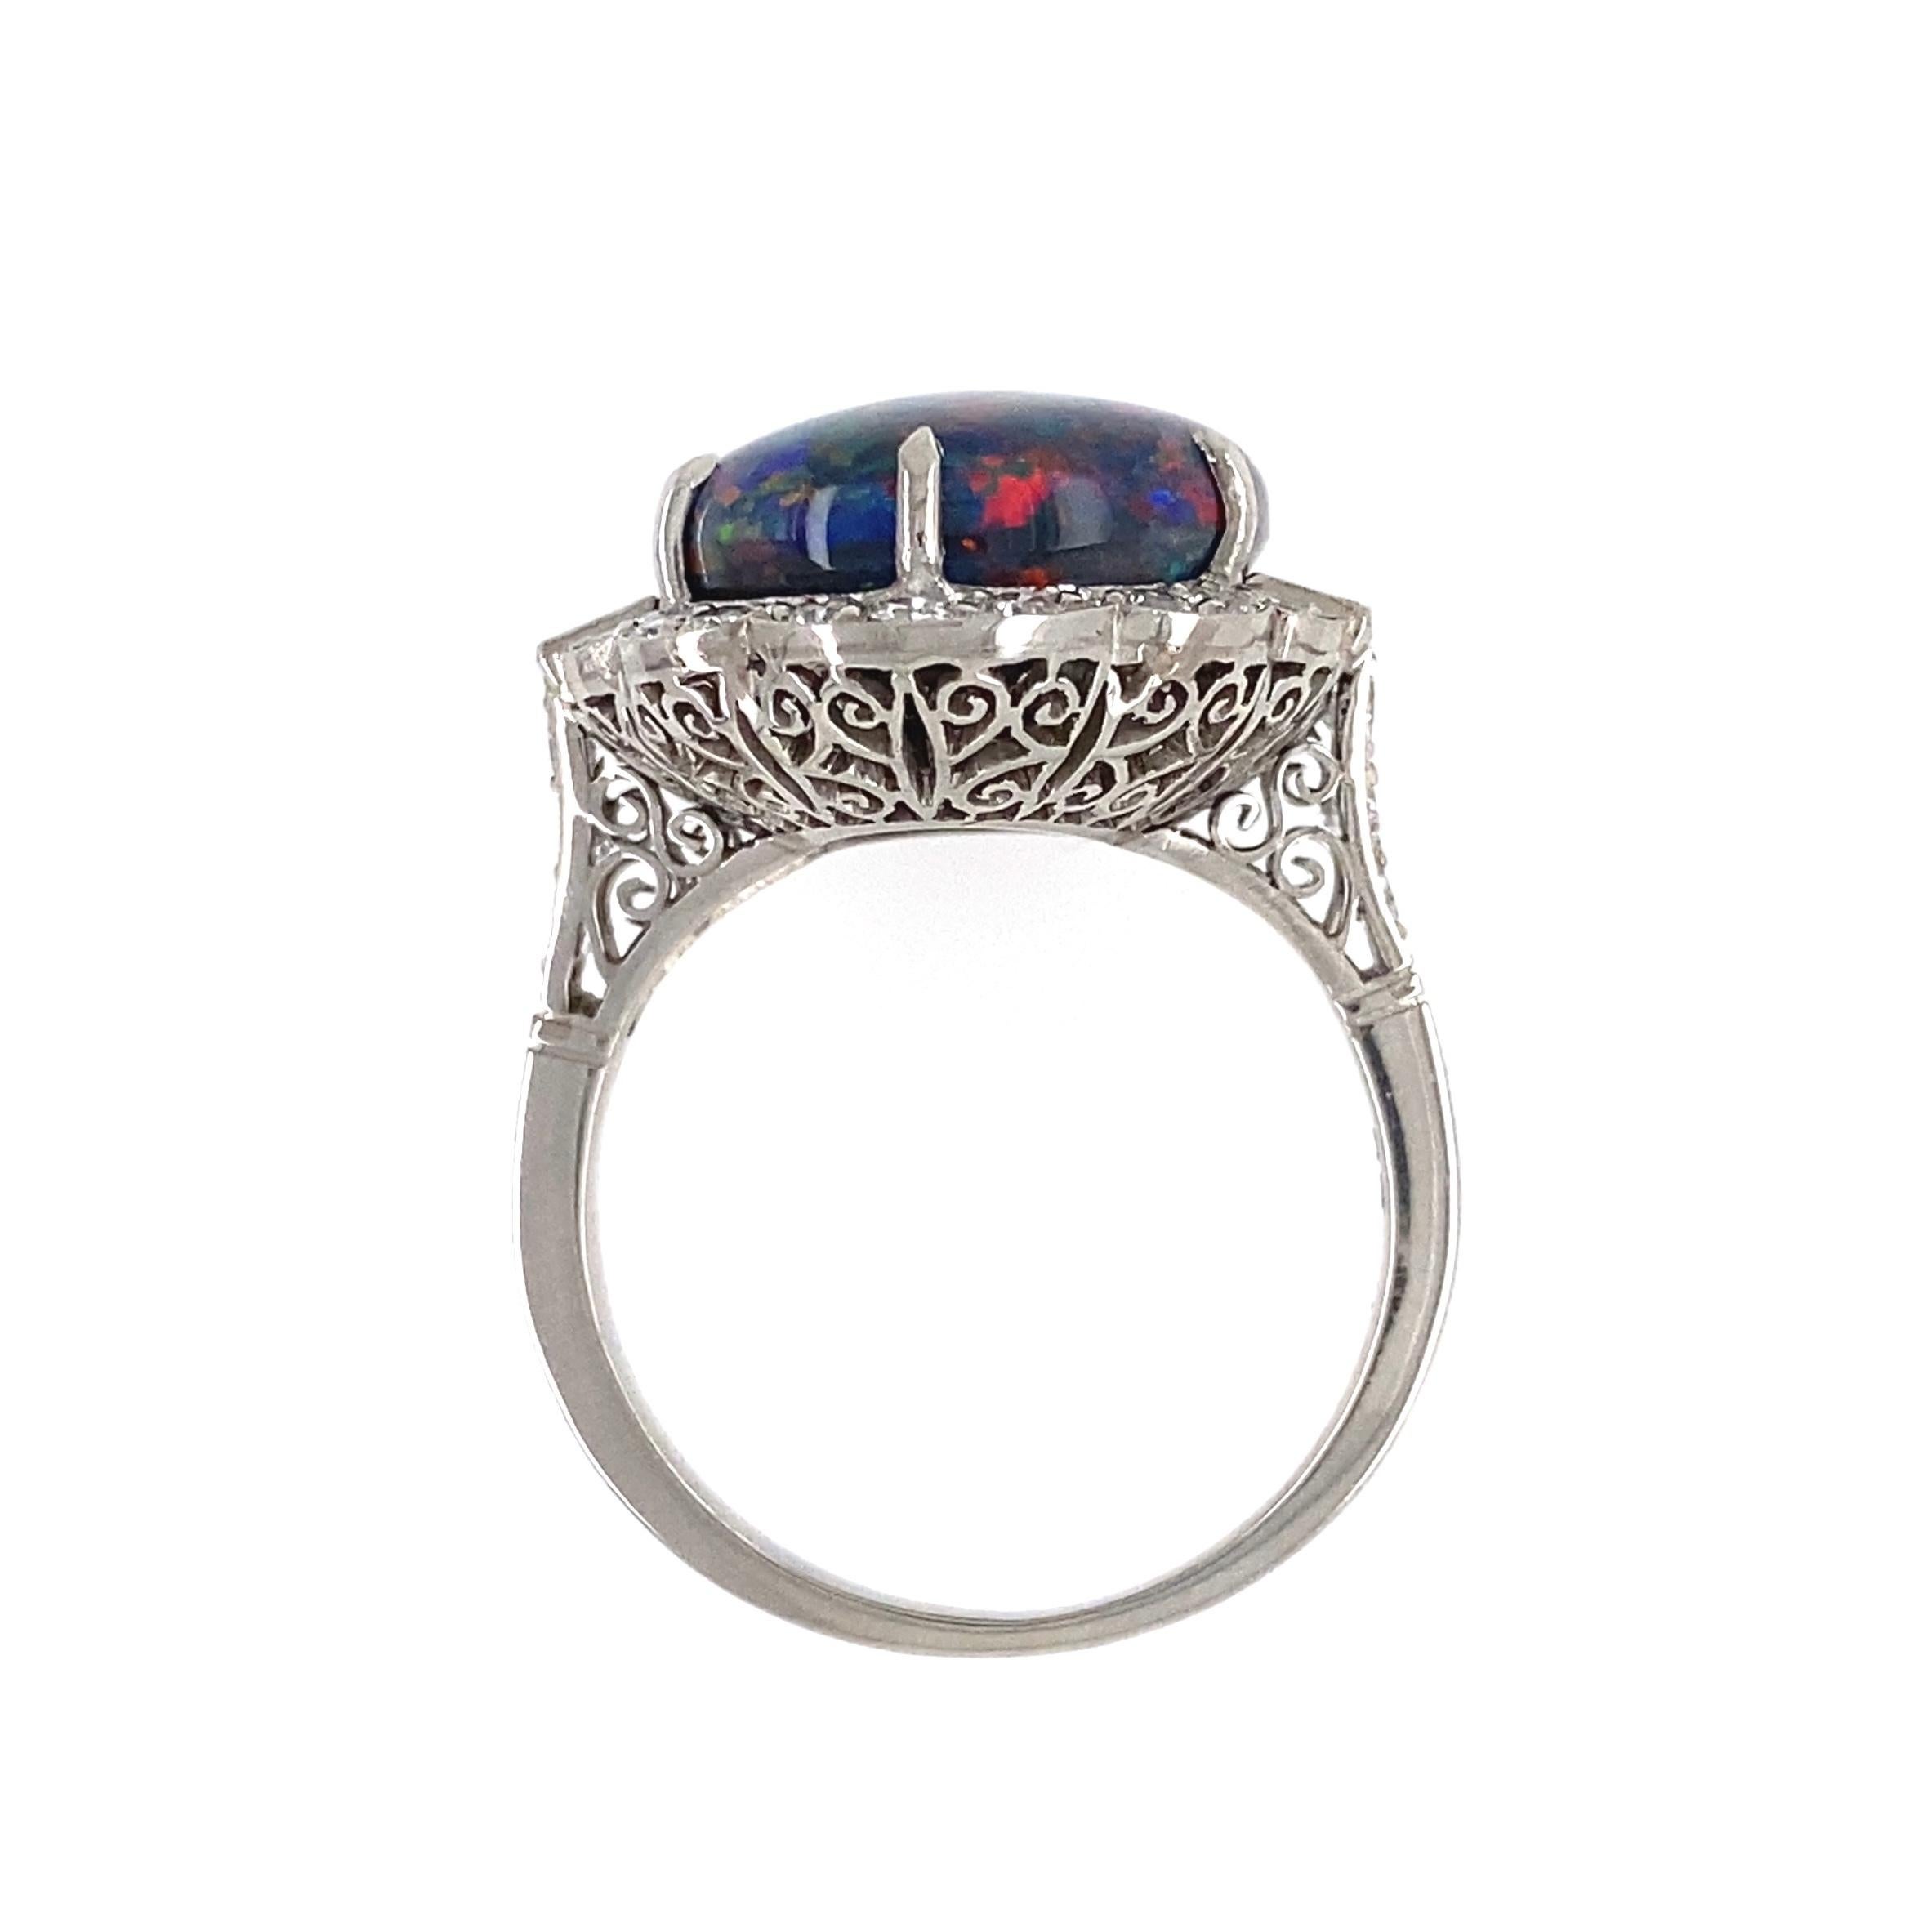 7.78 Carat Black Opal Diamond Platinum Art Deco Ring Estate Fine Jewelry In Excellent Condition For Sale In Montreal, QC